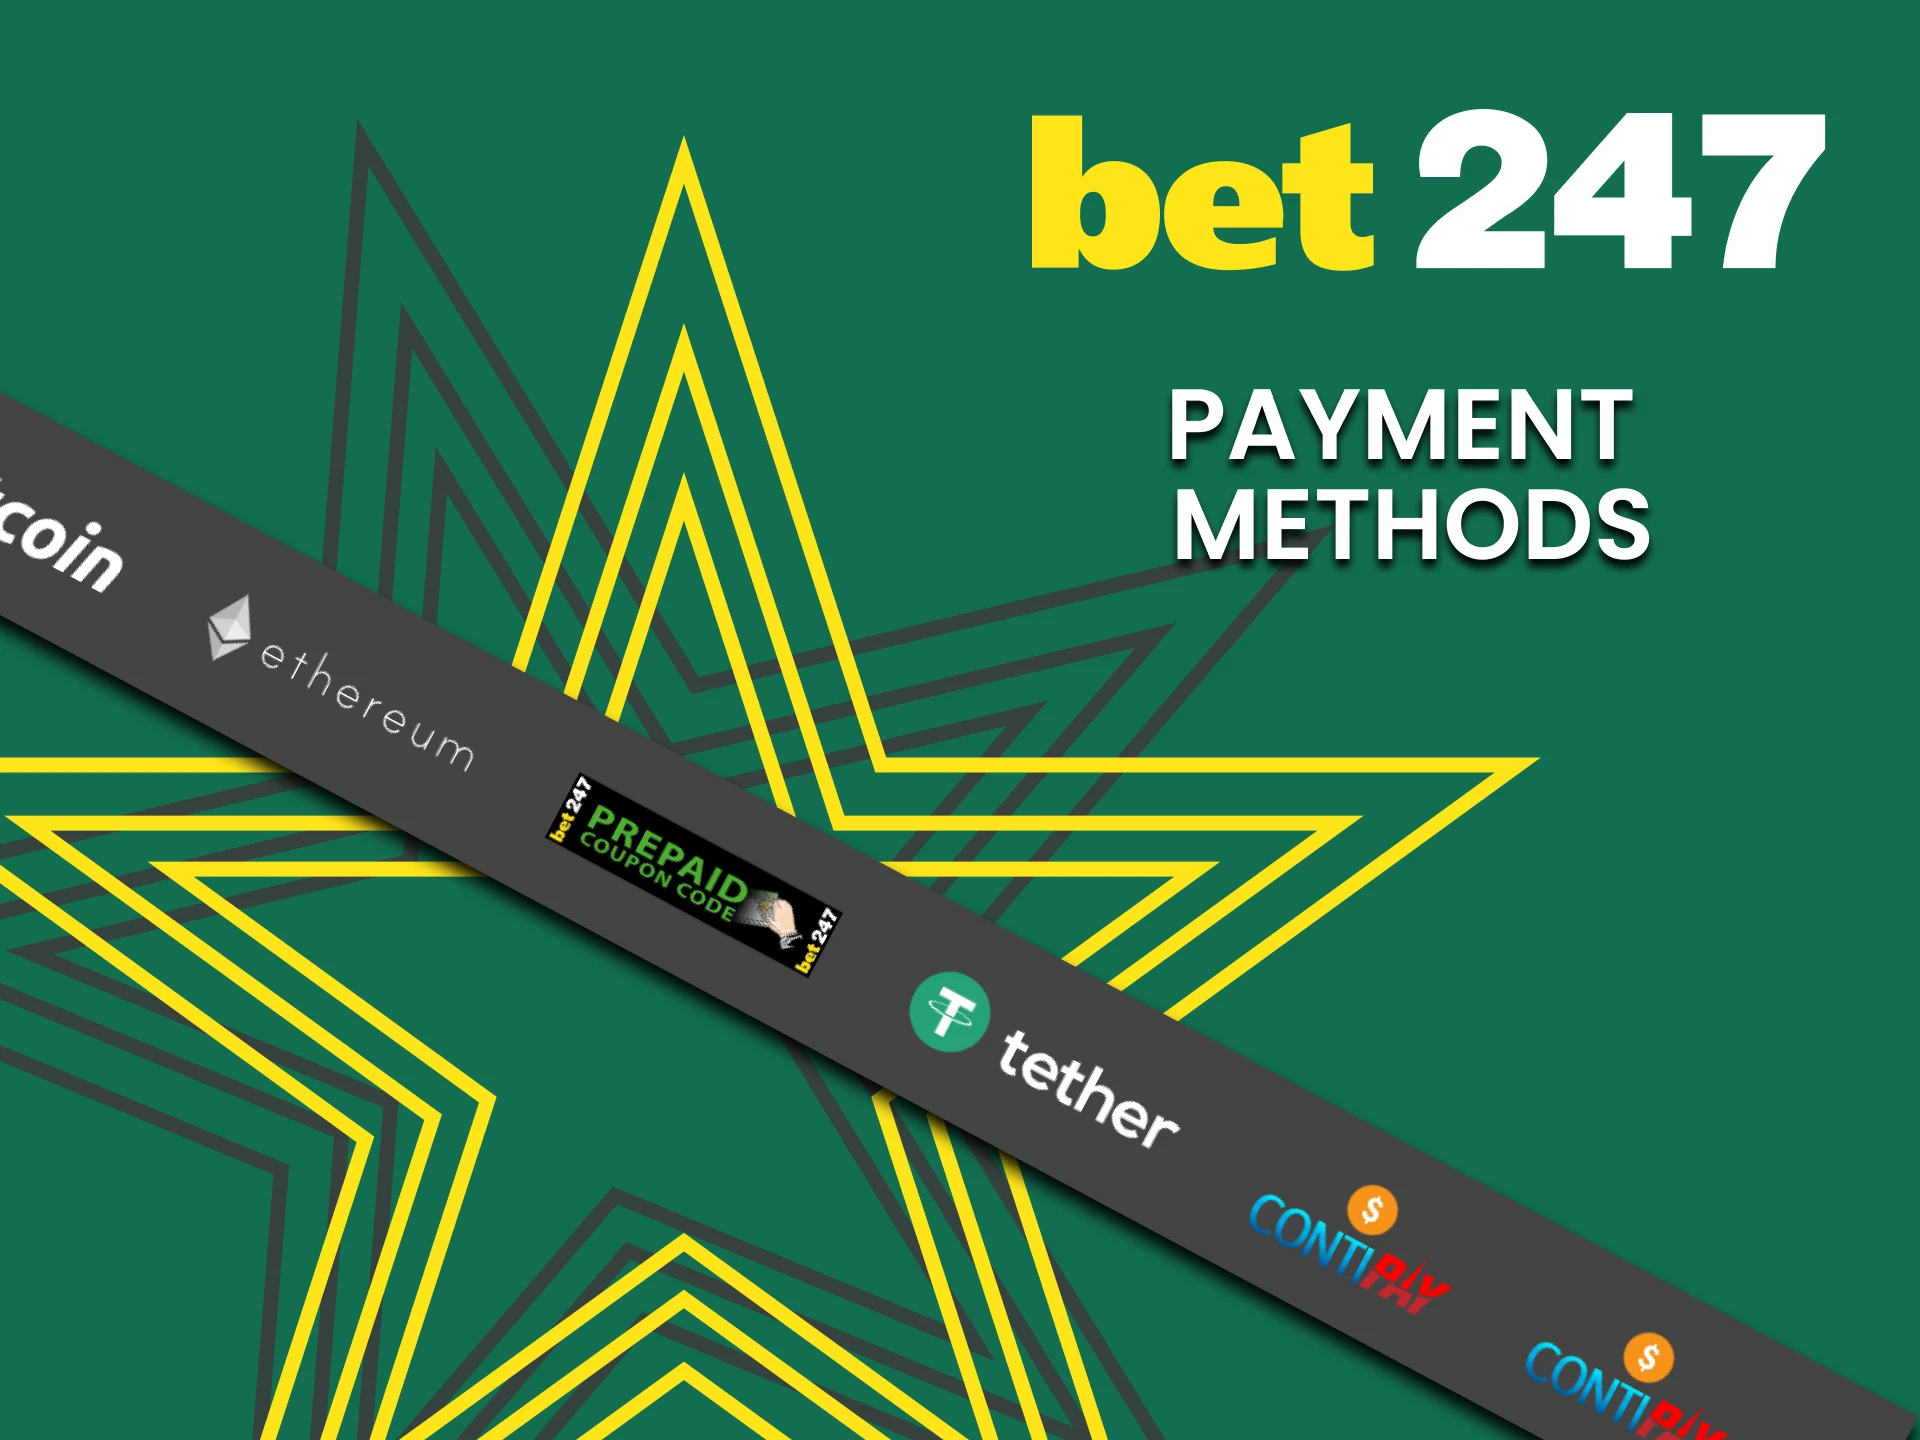 Bet247 has different types and systems for payouts.